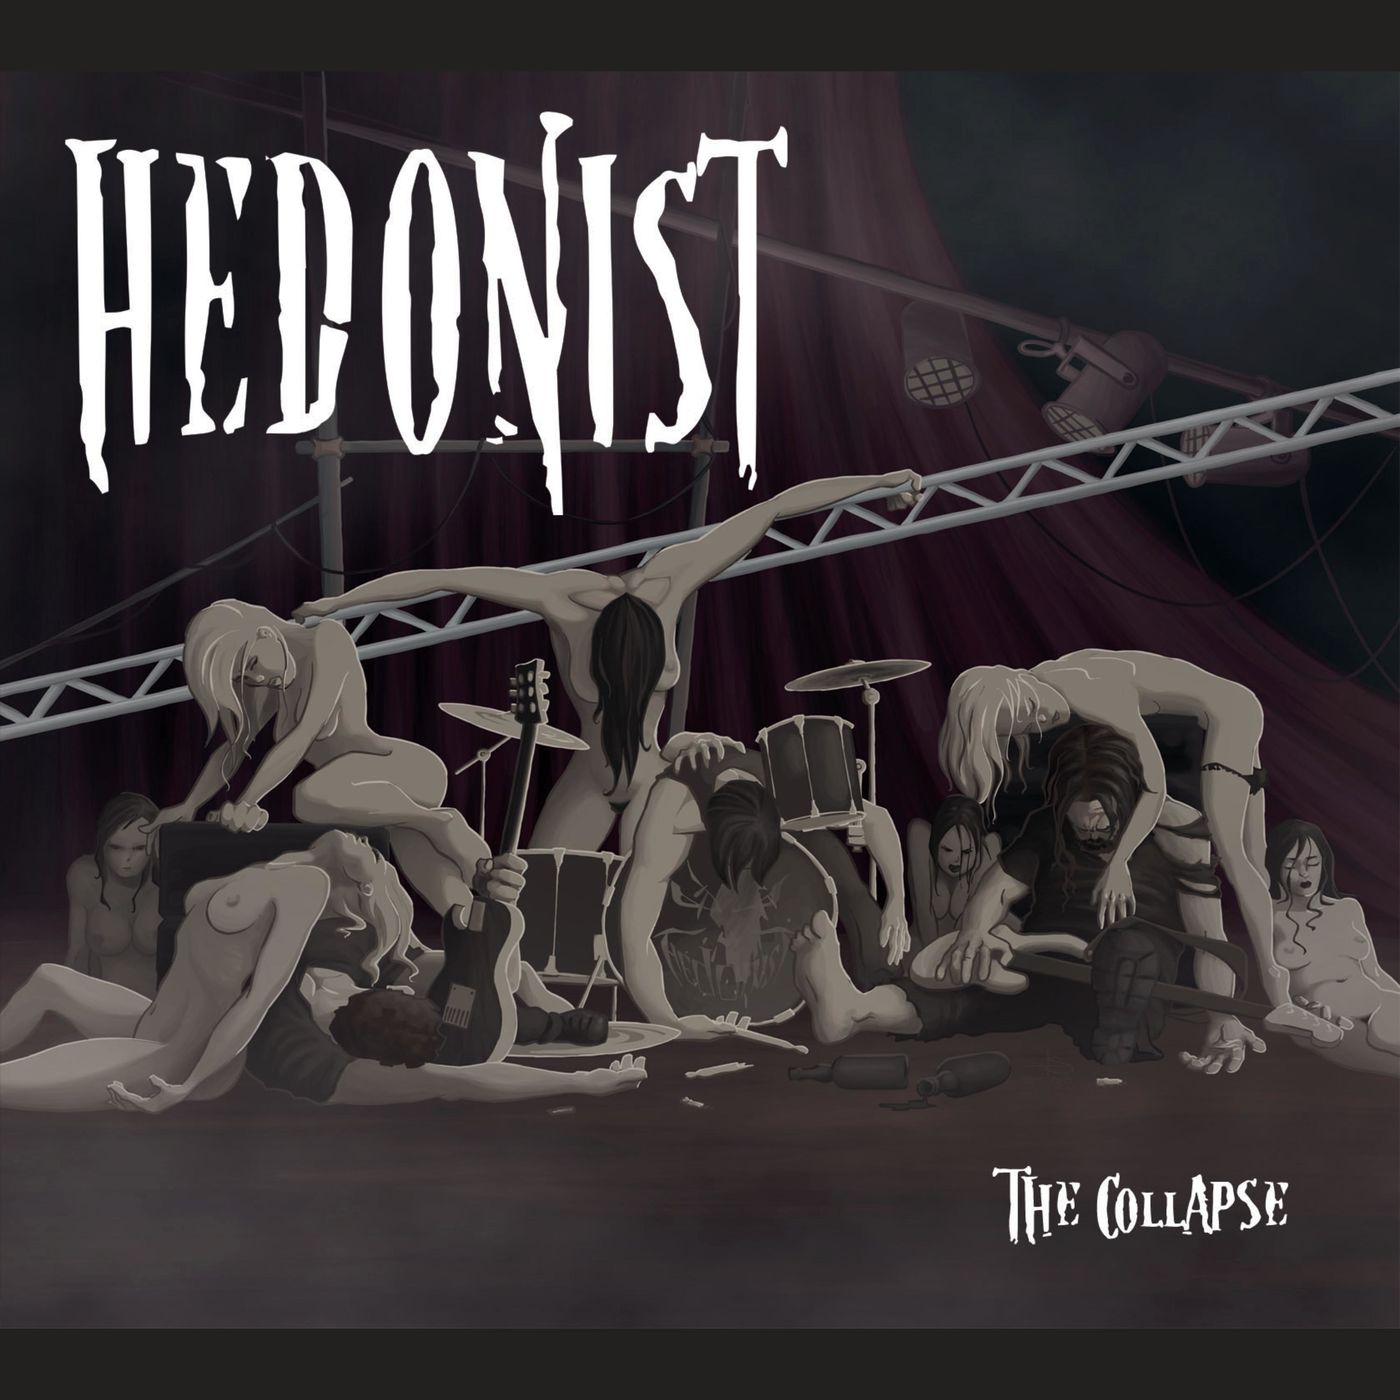 Hedonist 2016 - The Collapse